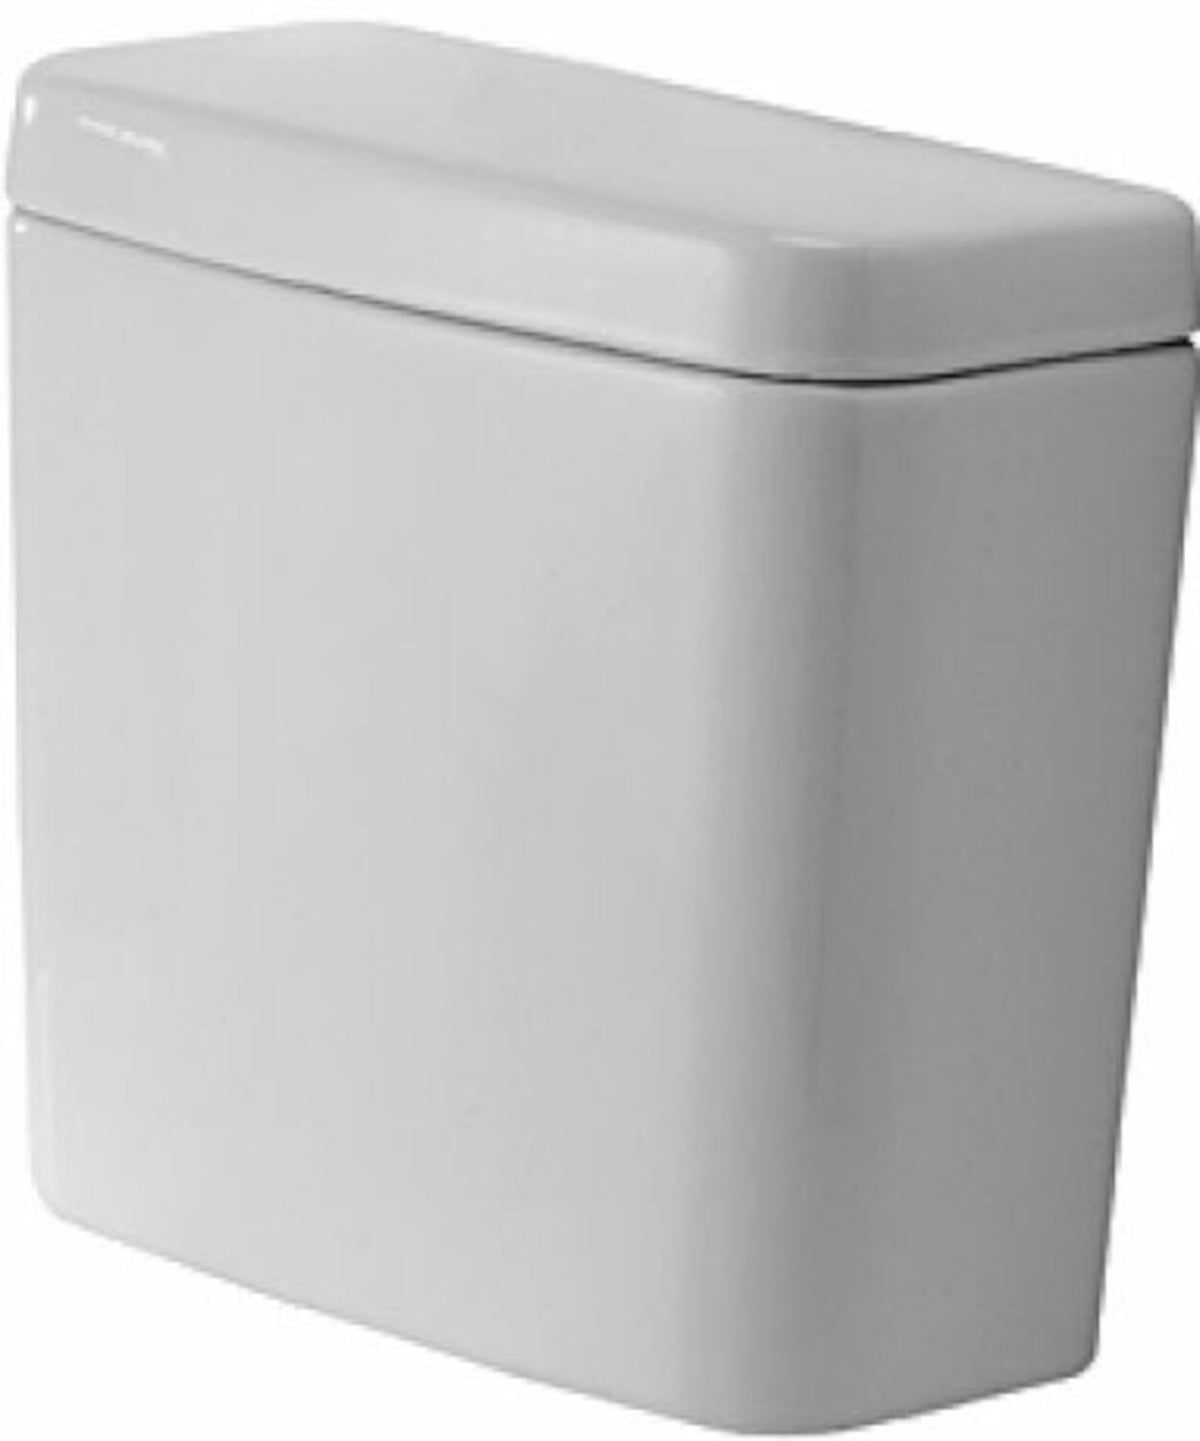 D-CODE TWO-PIECE TOILET TANK ONLY